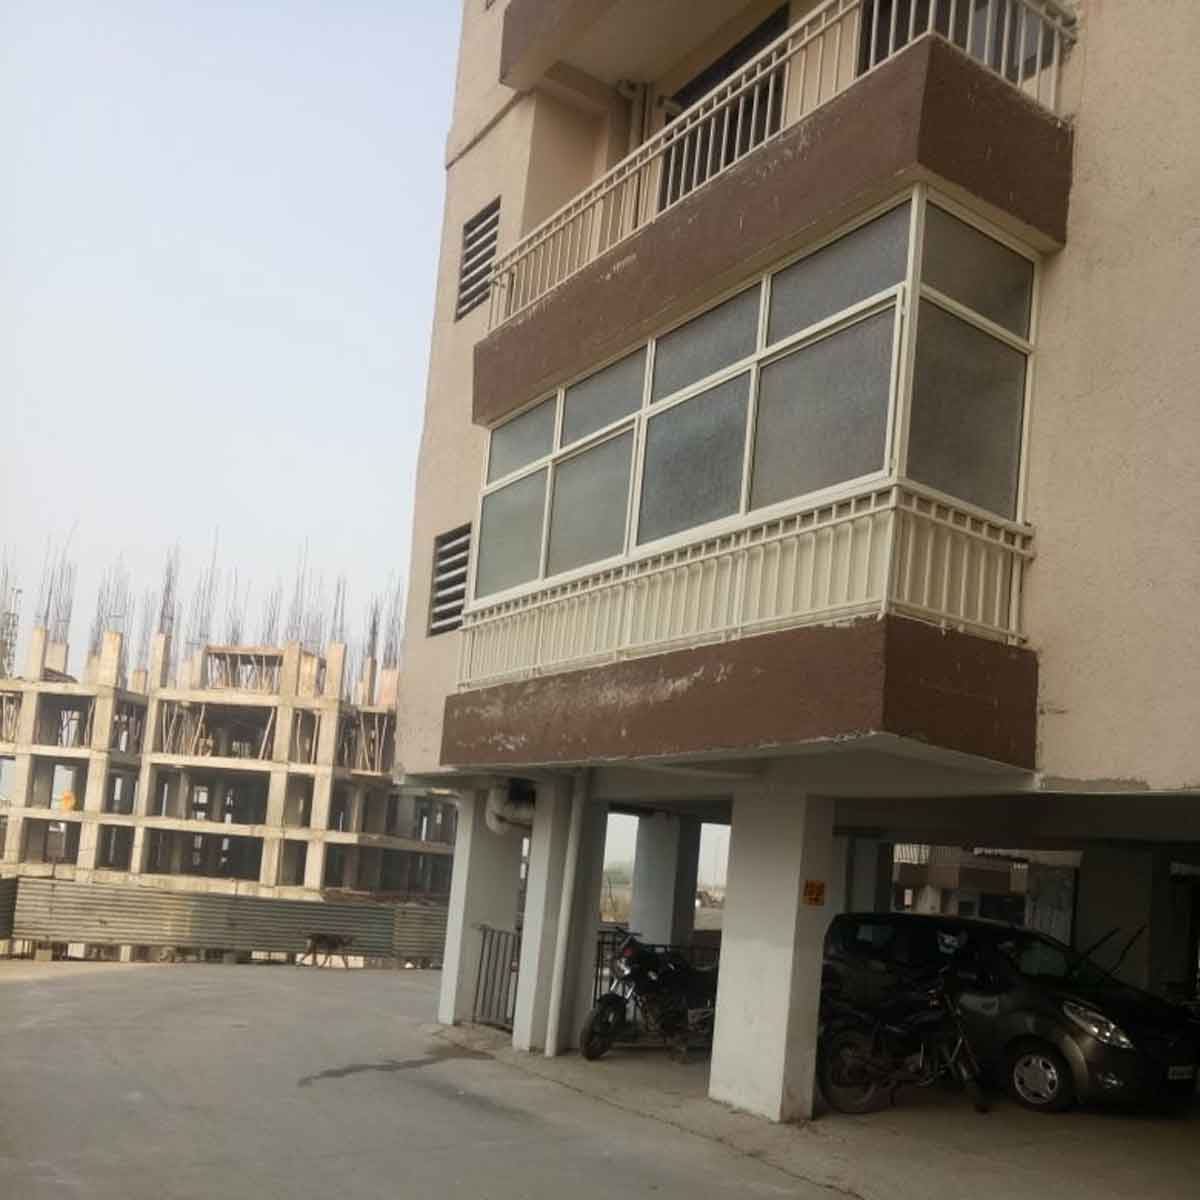 UPVC Aluminium Balcony Covering Manufacturers, Suppliers in Rohtak